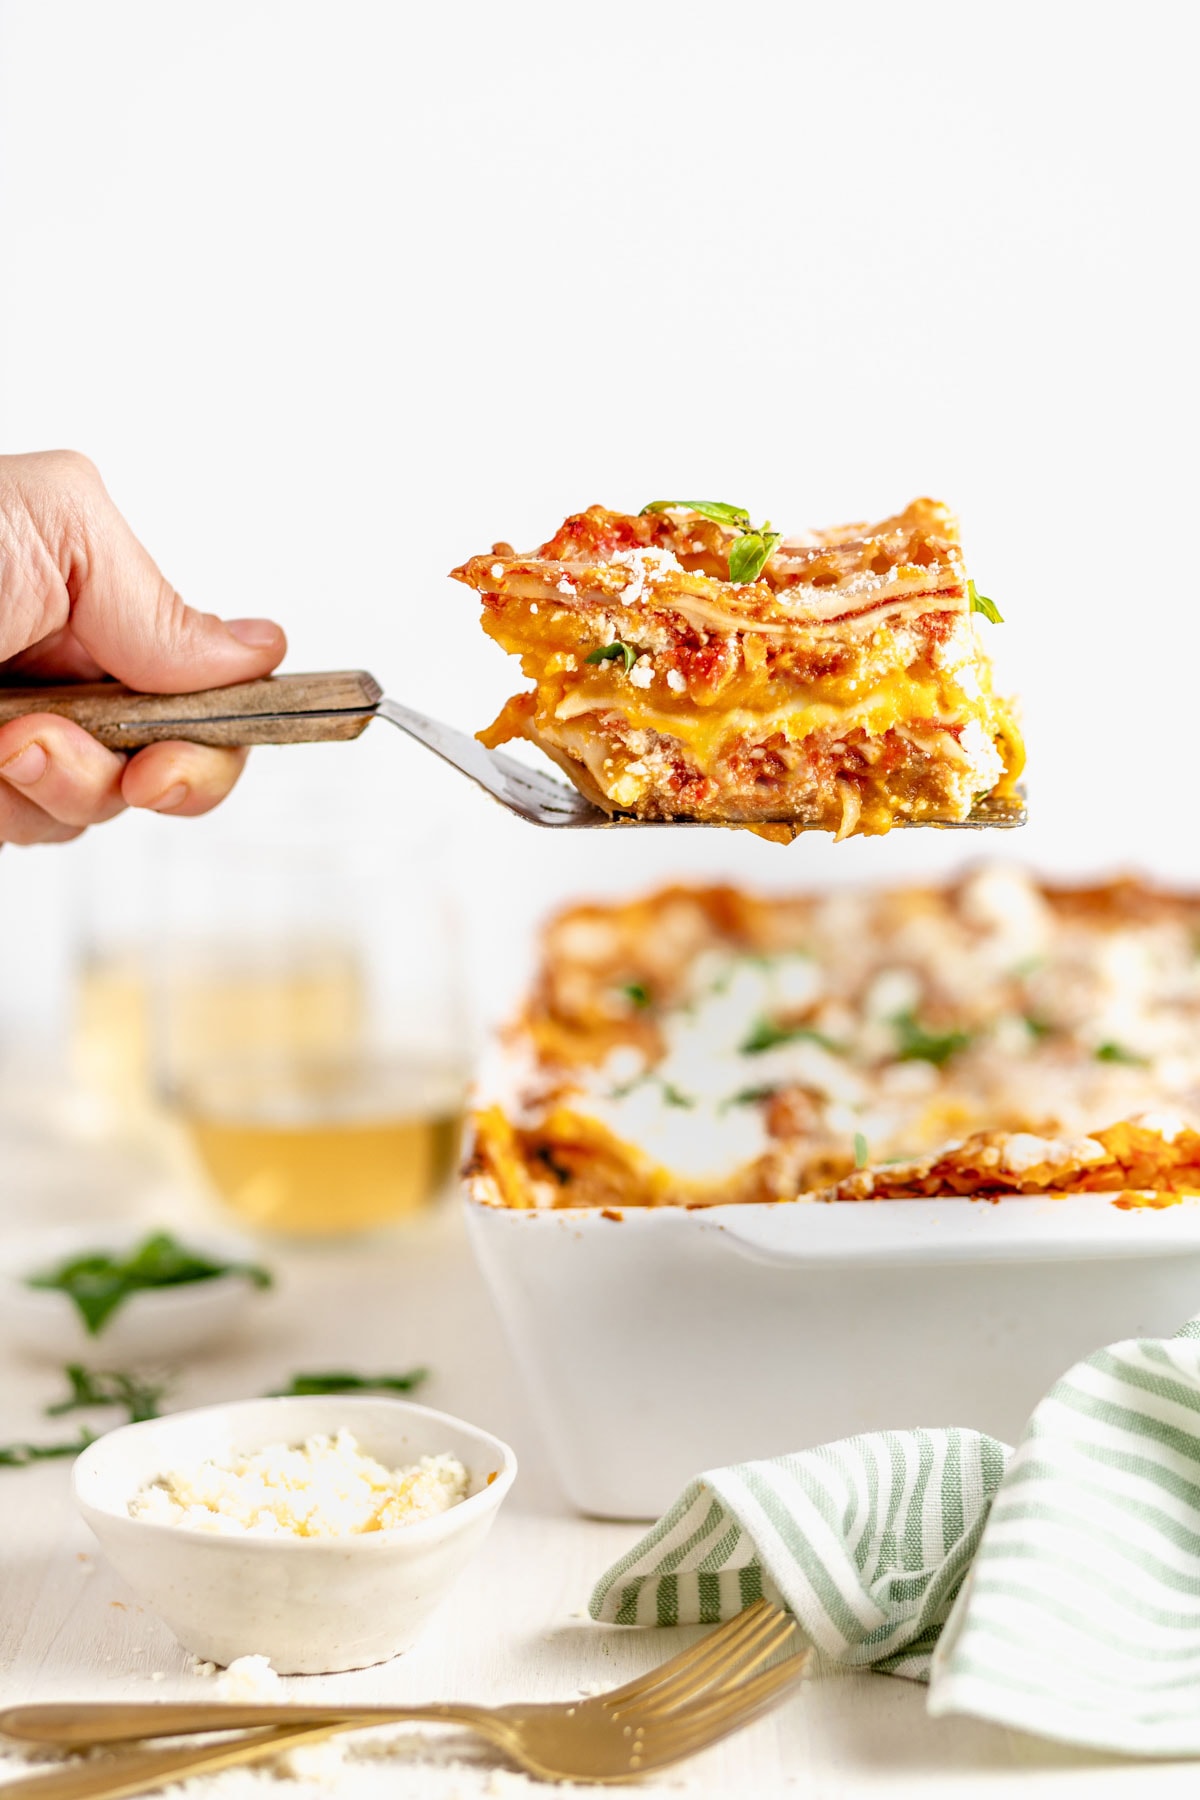 A slice of the lasagna on a spatula from the side